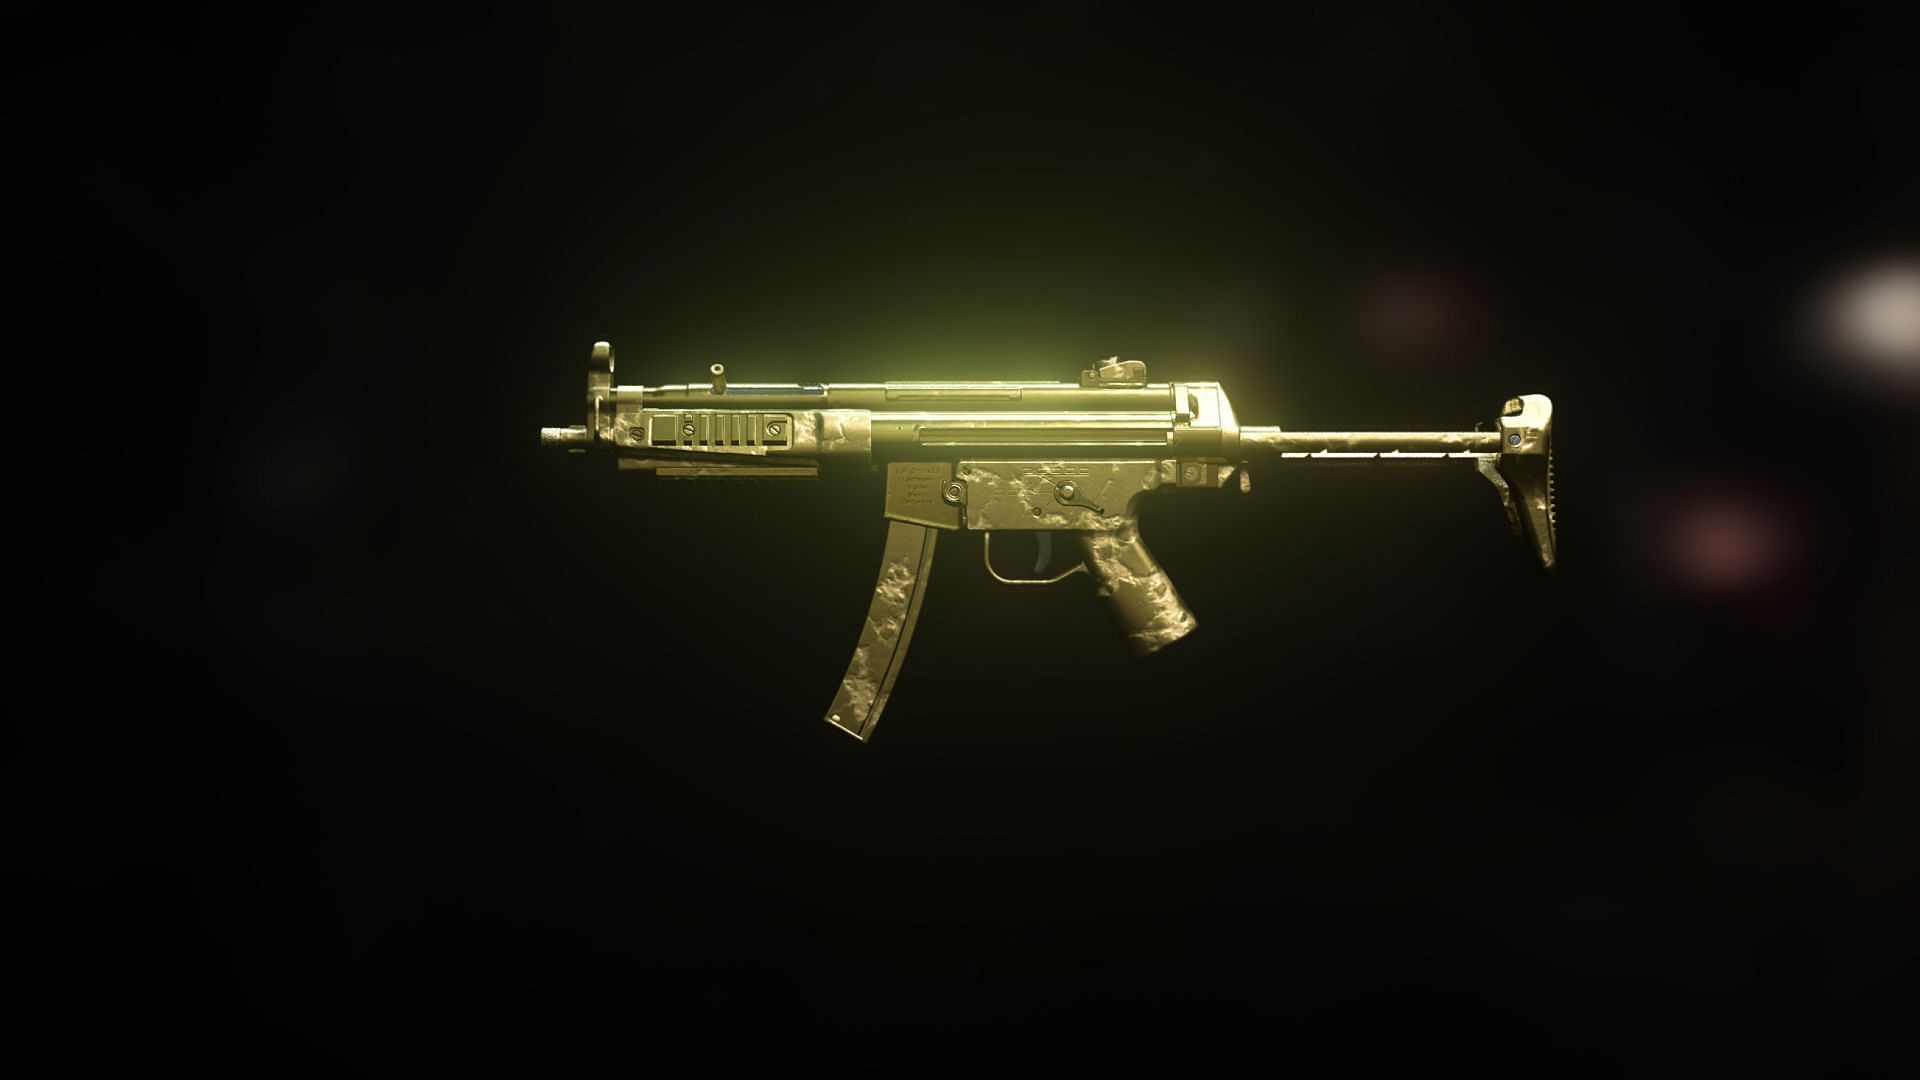 The Lachmann Sub SMG in Warzone 2 (Image via Activision)